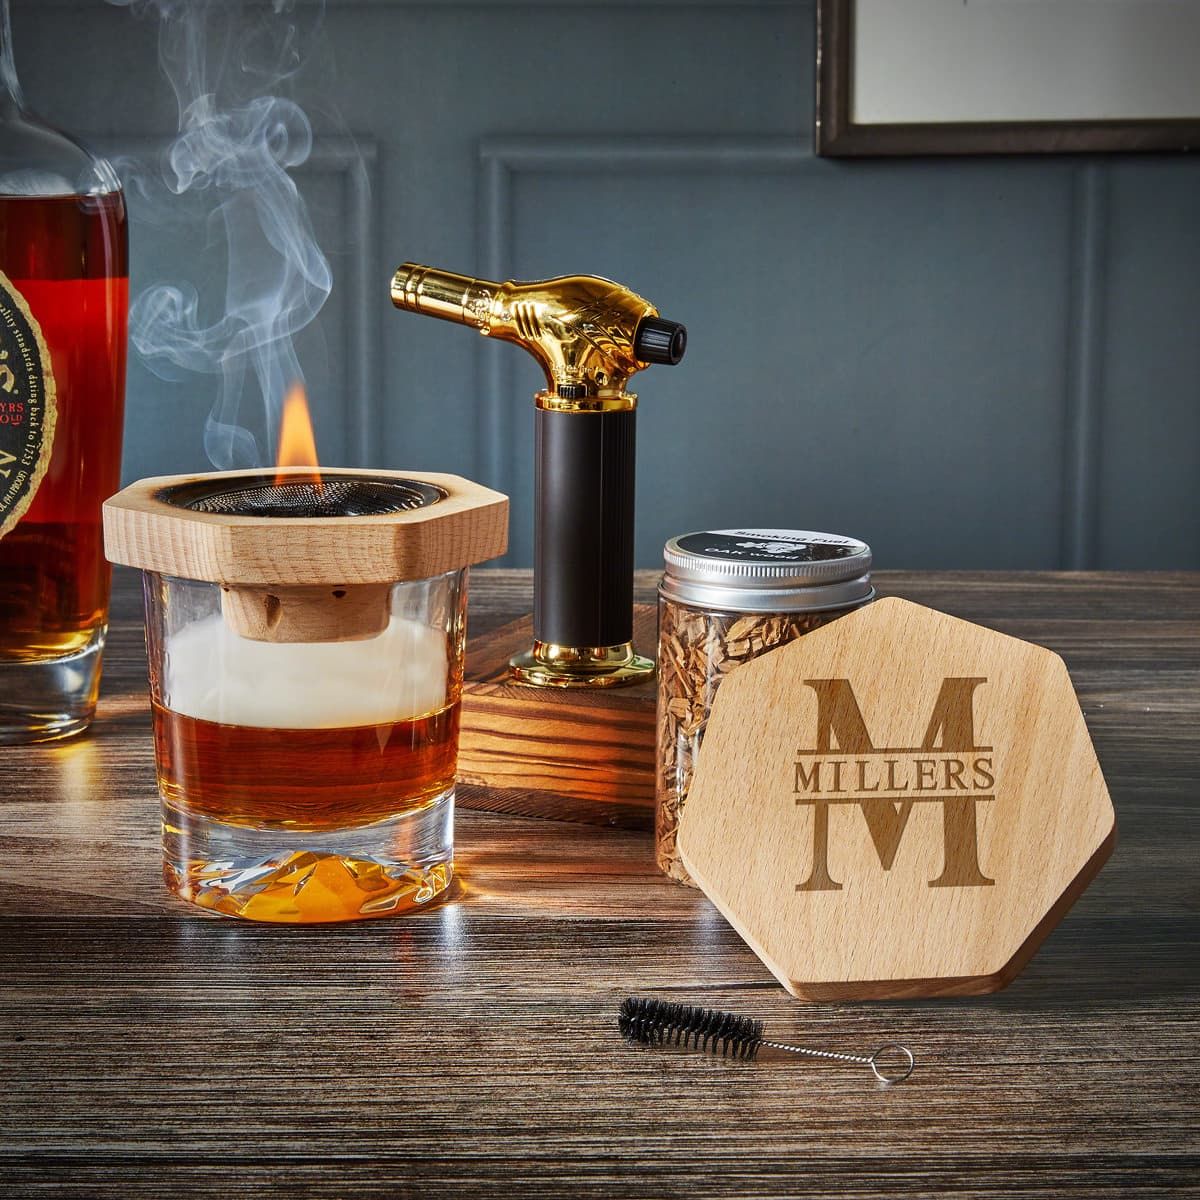 Whiskey Cocktail Smoker Kit, Ogednac Old Fashioned Smoker Kit with Torch, 4 Flavors Wood Chips, Groomsmen Wedding Gifts for Bourbon lovers, Drink